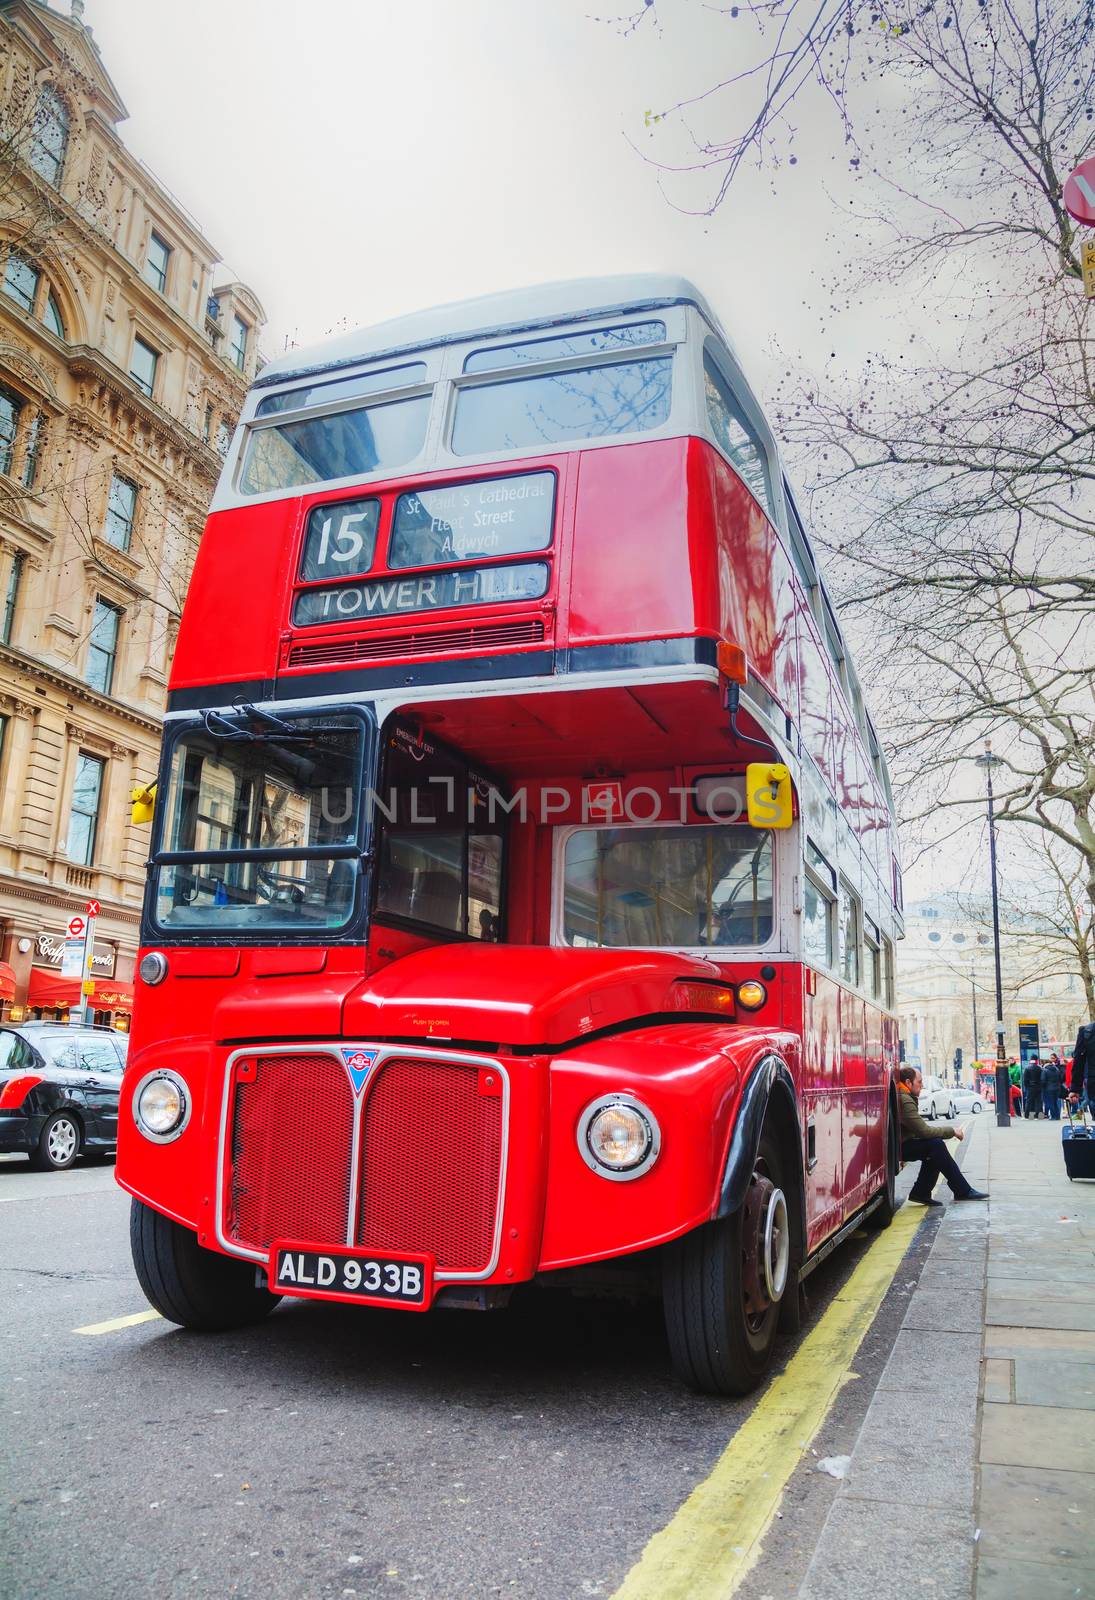 LONDON - APRIL 5: Iconic red double decker bus on April 5, 2015 in London, UK. The London Bus is one of London's principal icons, the archetypal red rear-entrance Routemaster being recognised worldwide.